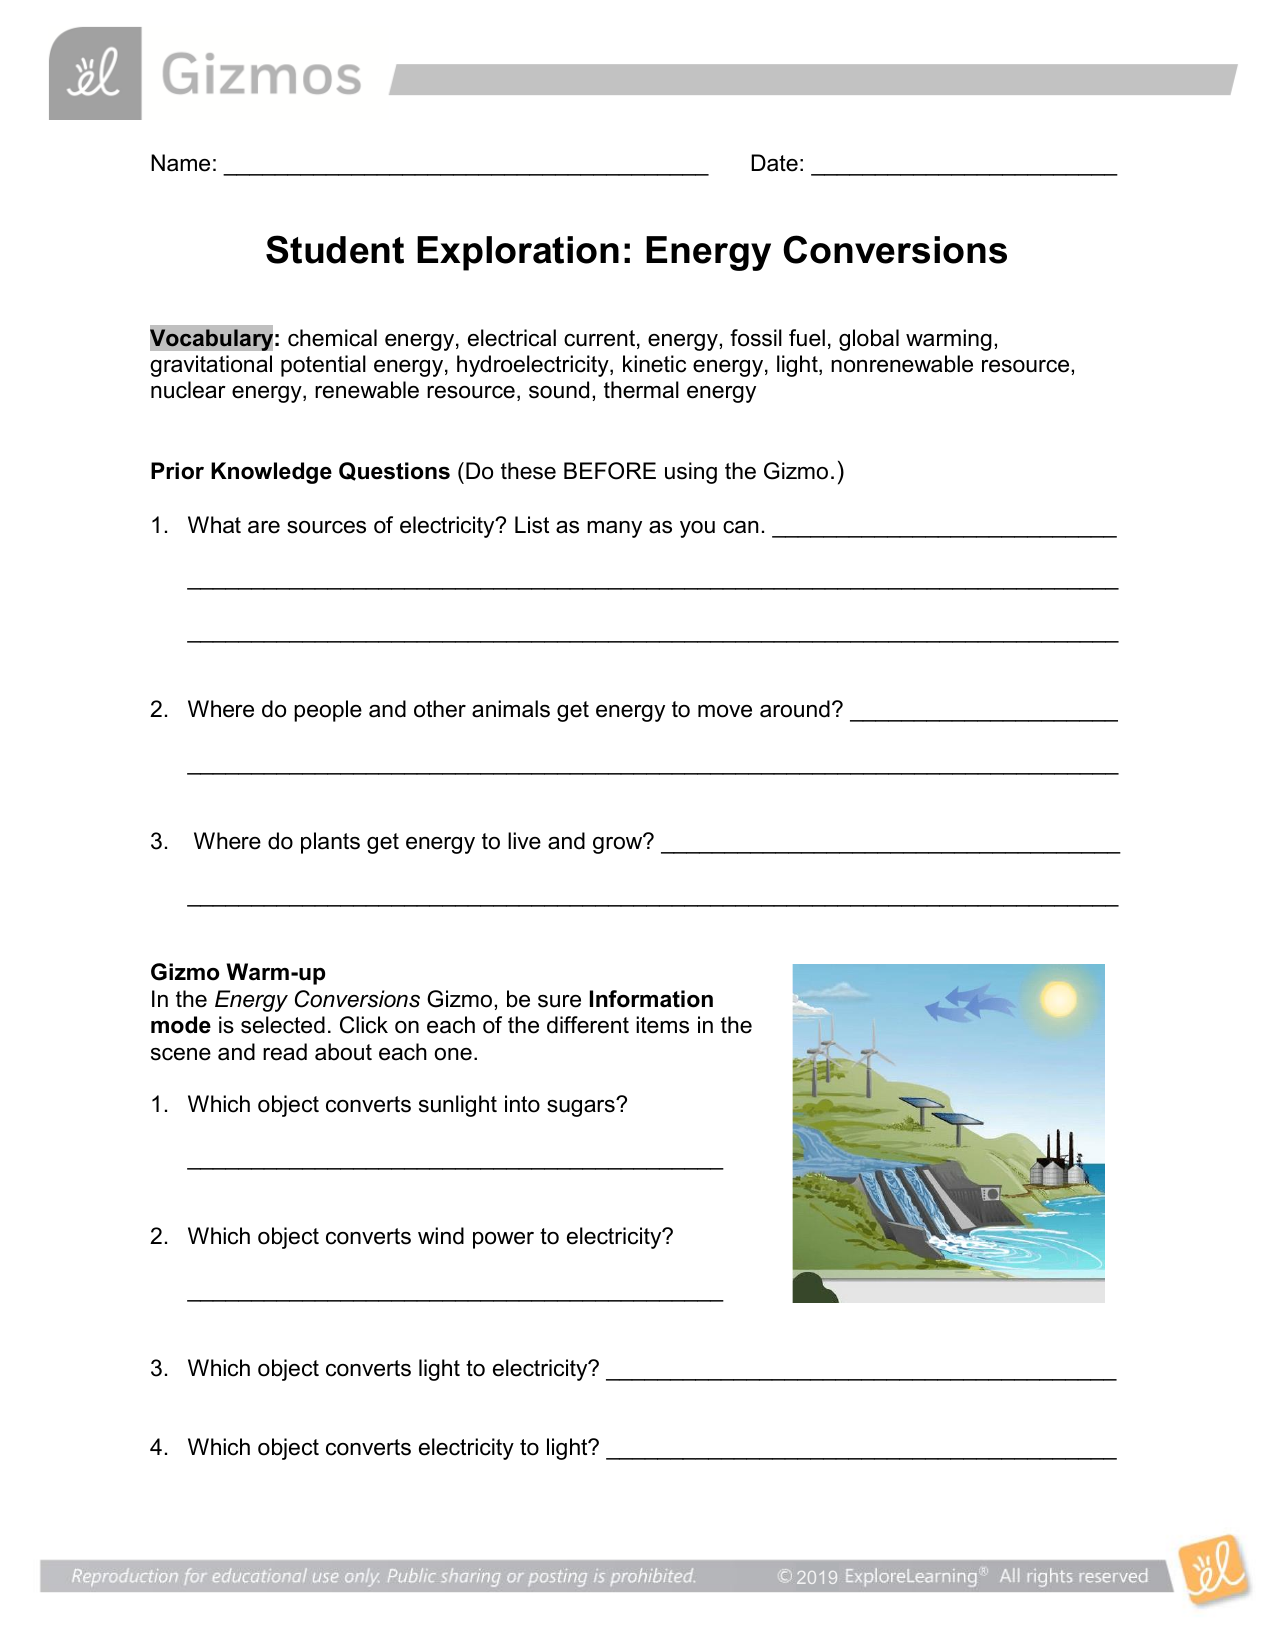 Energy Conversions Gizmo Answer Key Activity A Student Exploration